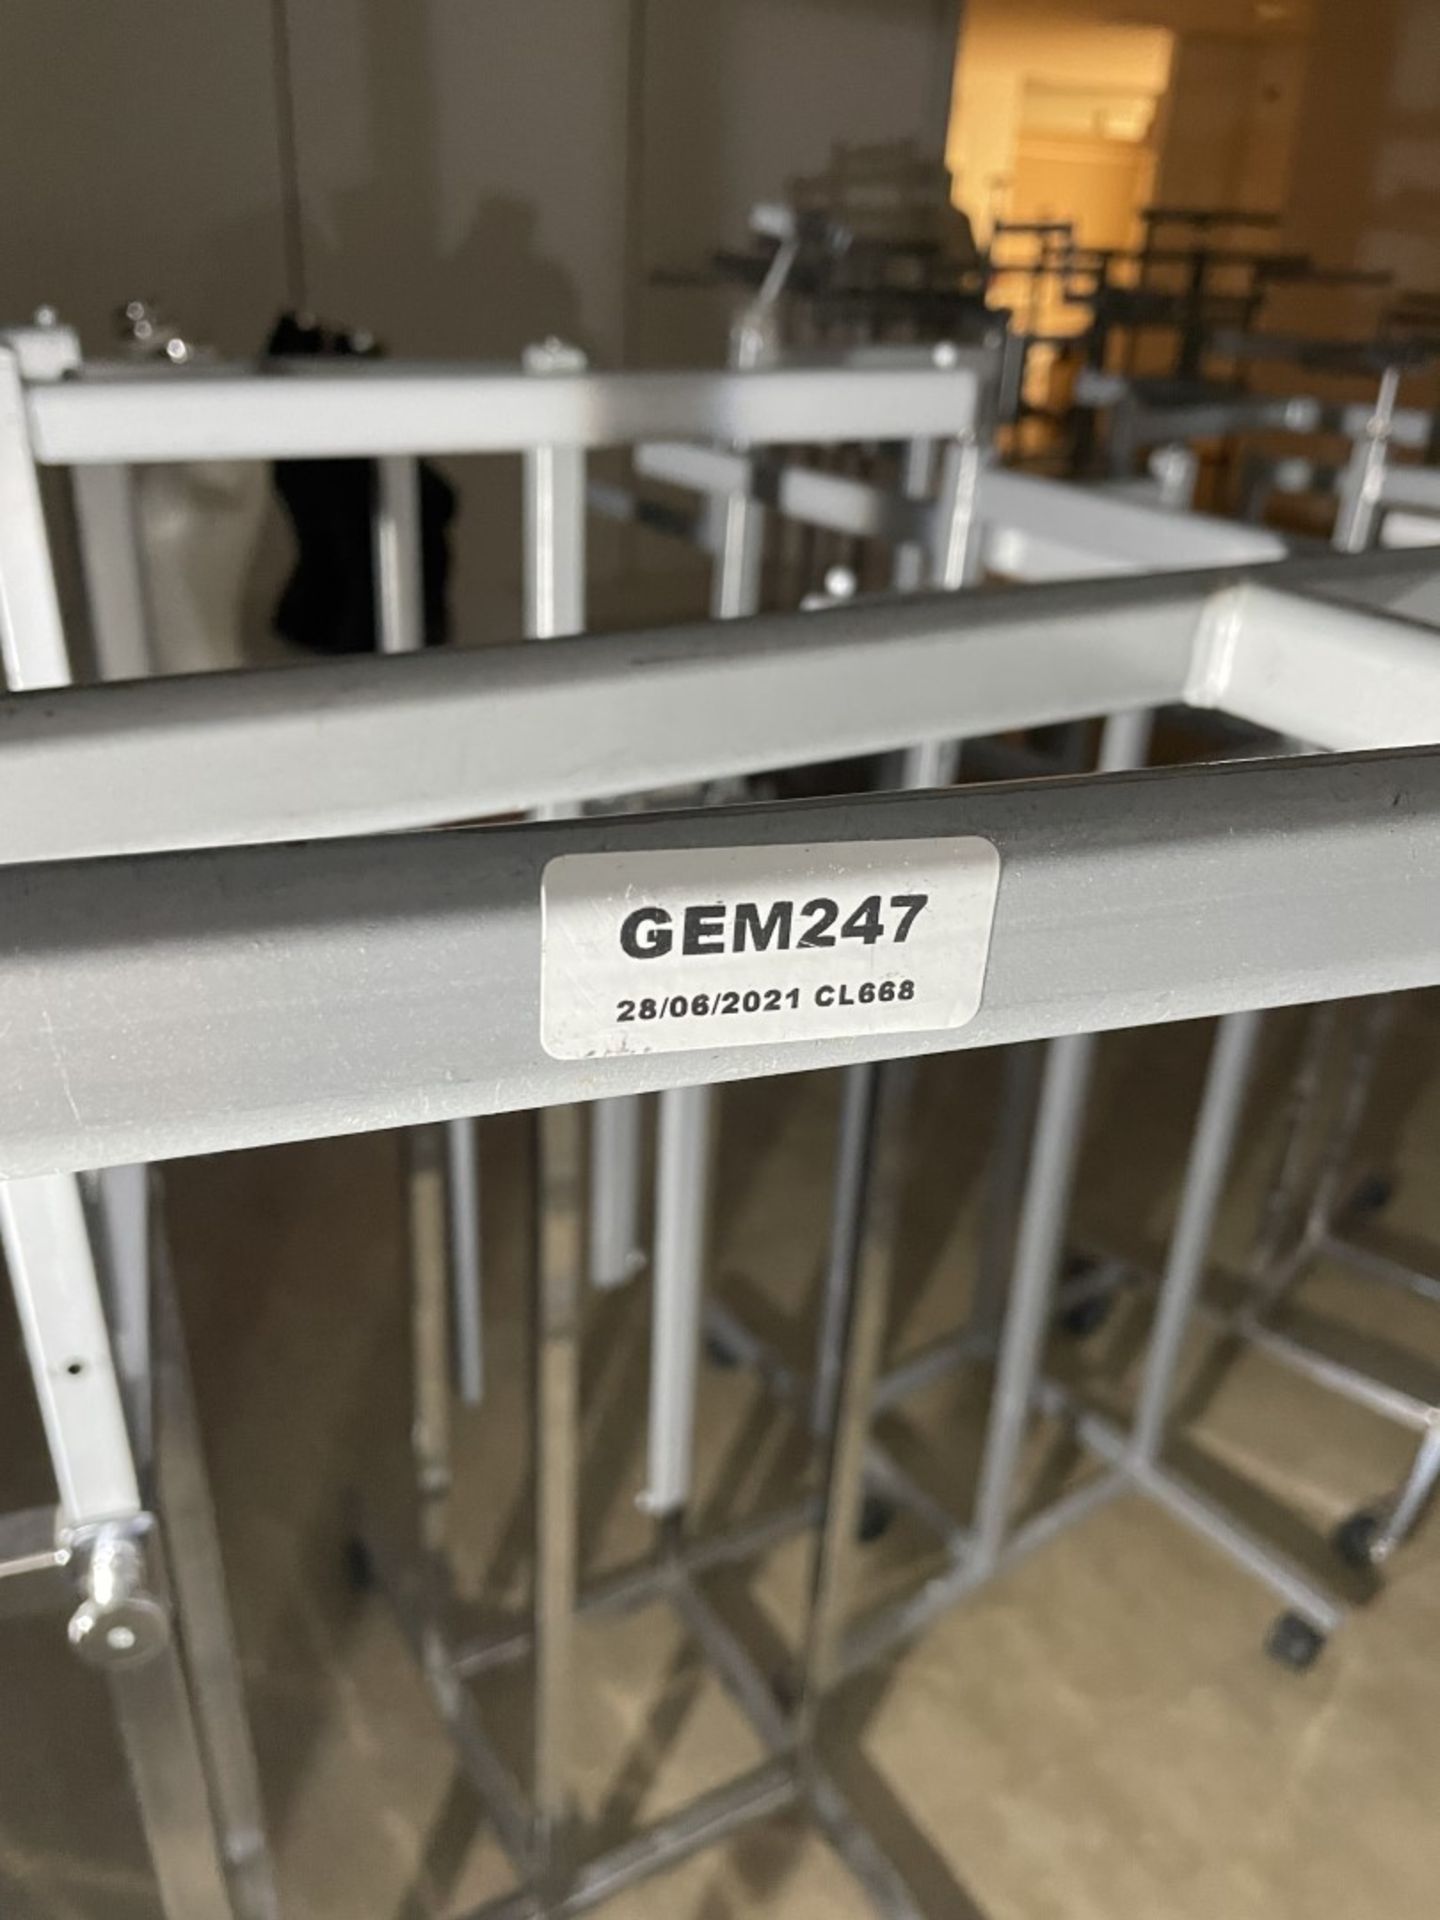 10 x Retail Display Clothes Rails Stands With Four Stepped Arm Rails - CL670 - Ref: GEM247A - - Image 6 of 12